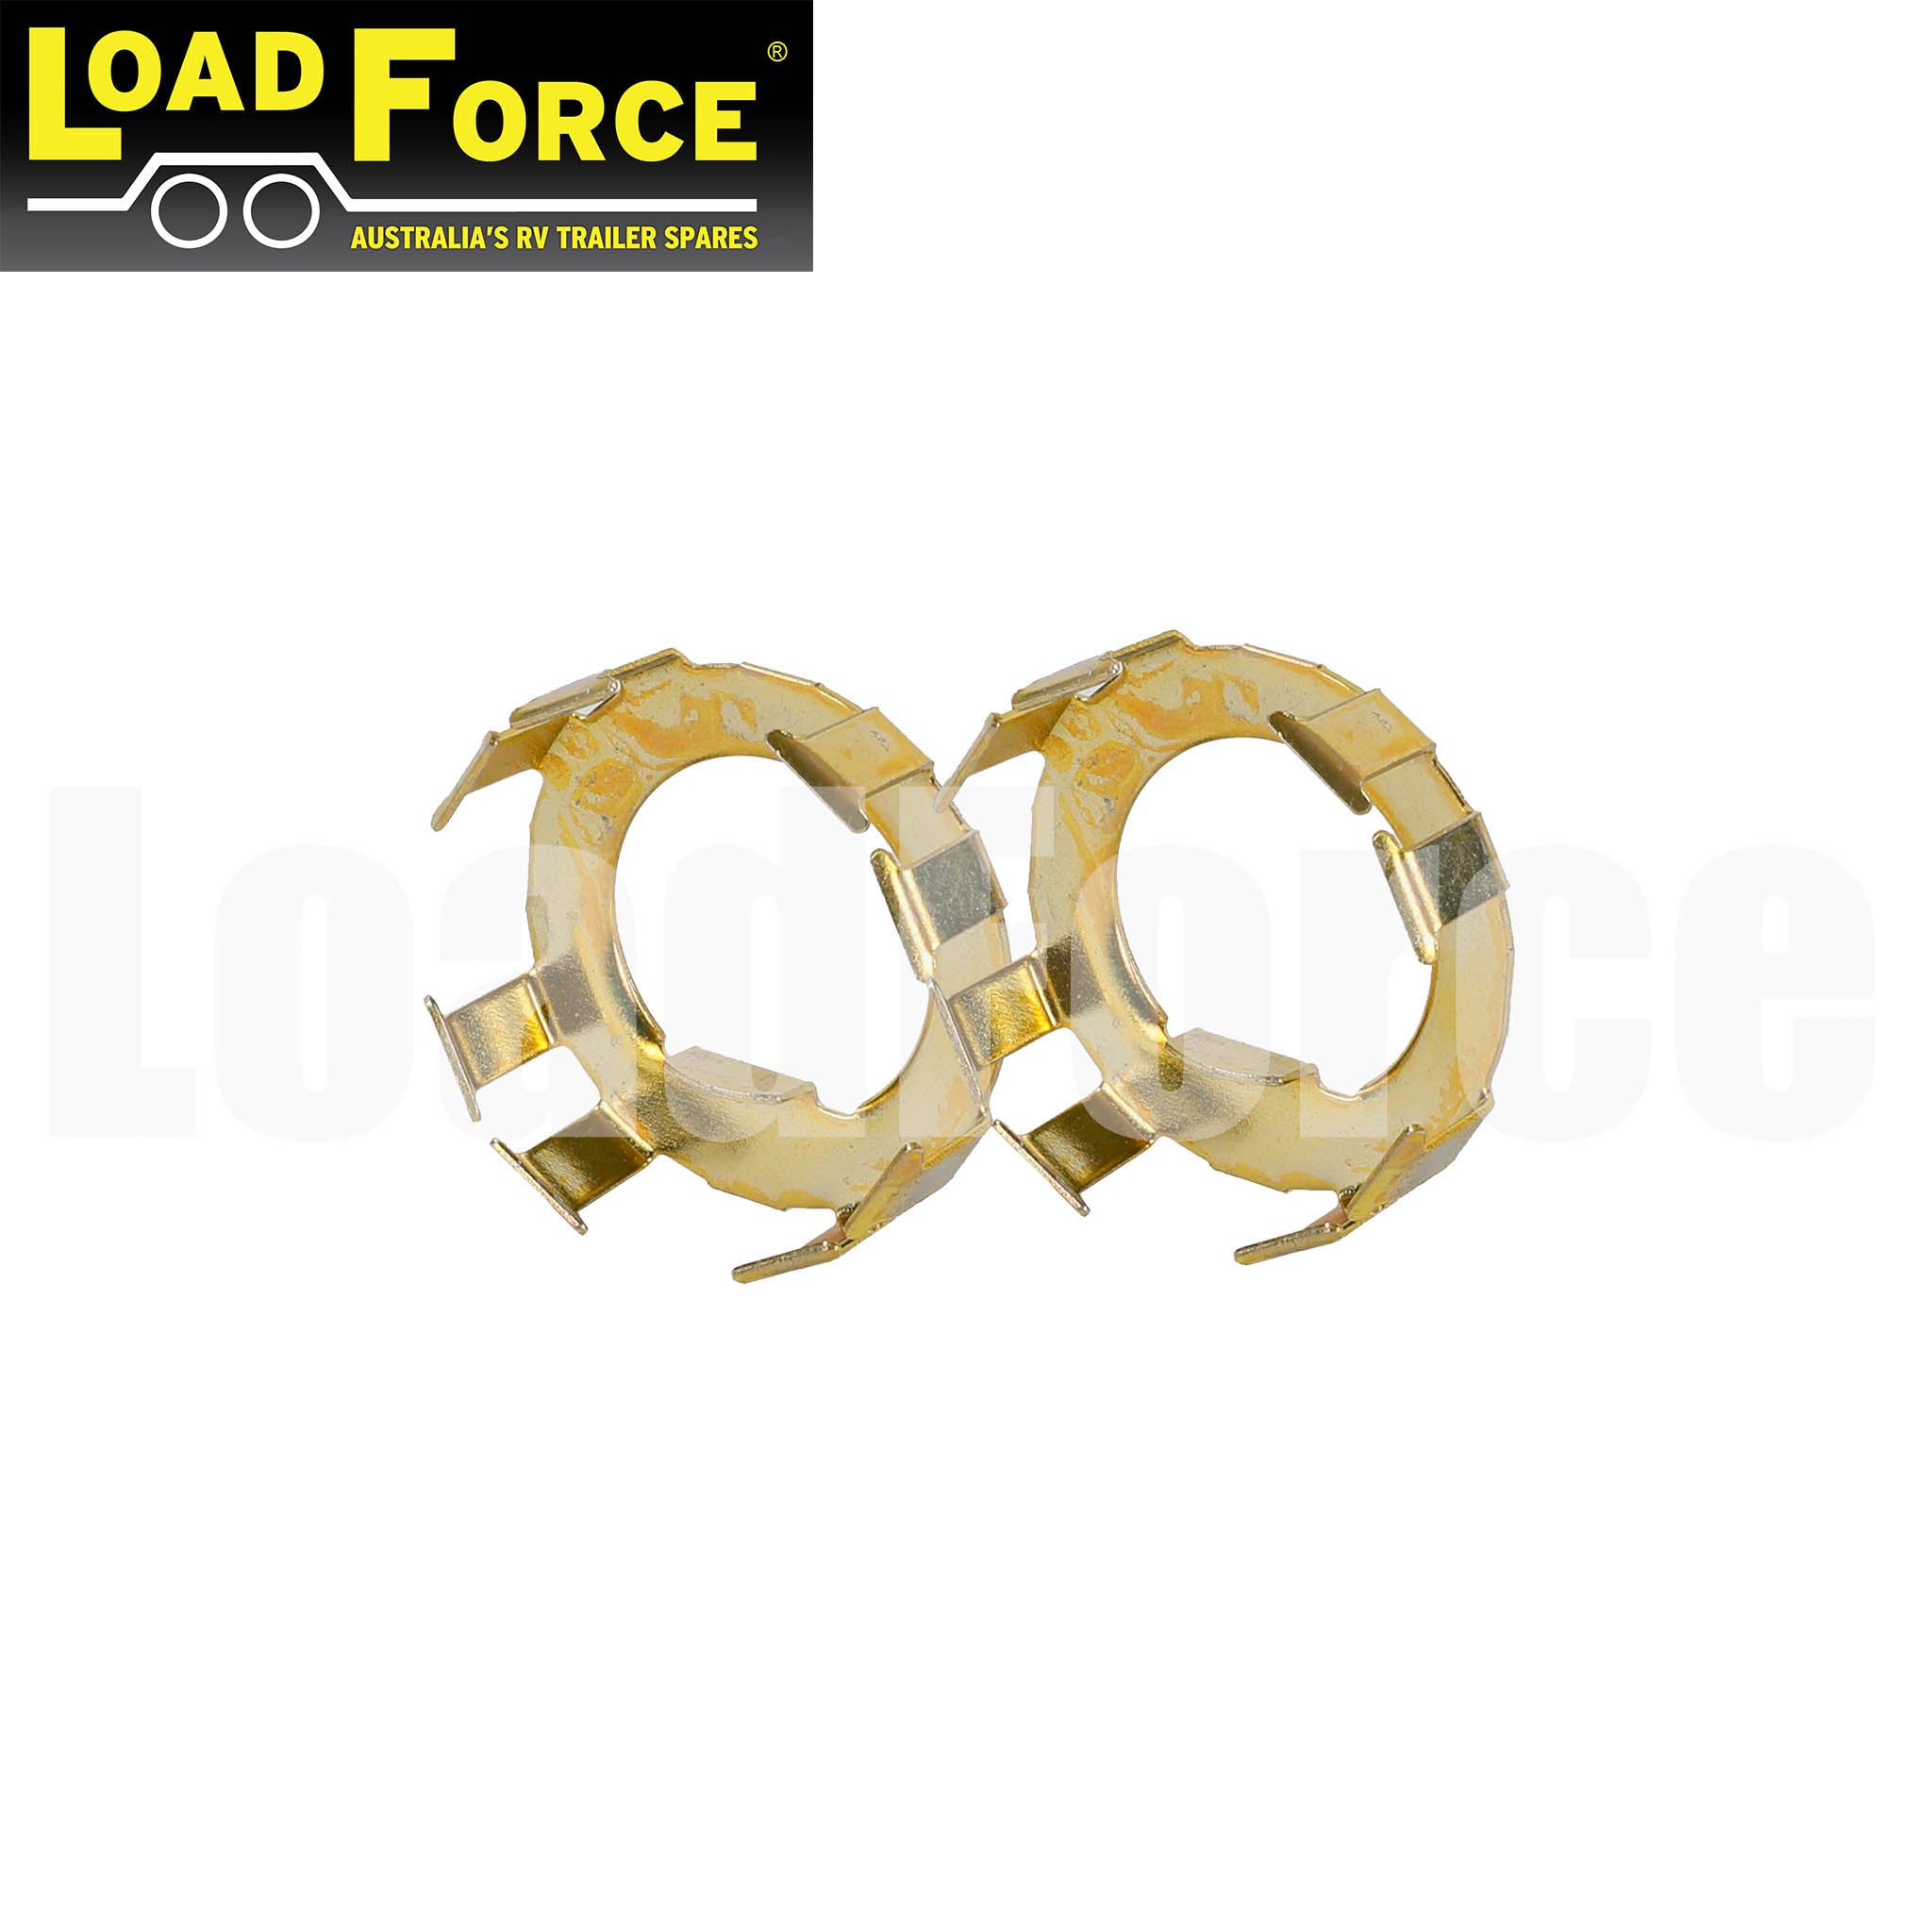 Axle Nut Locking Retainer Tab Clips for Dexter E-Z LUBE axles.